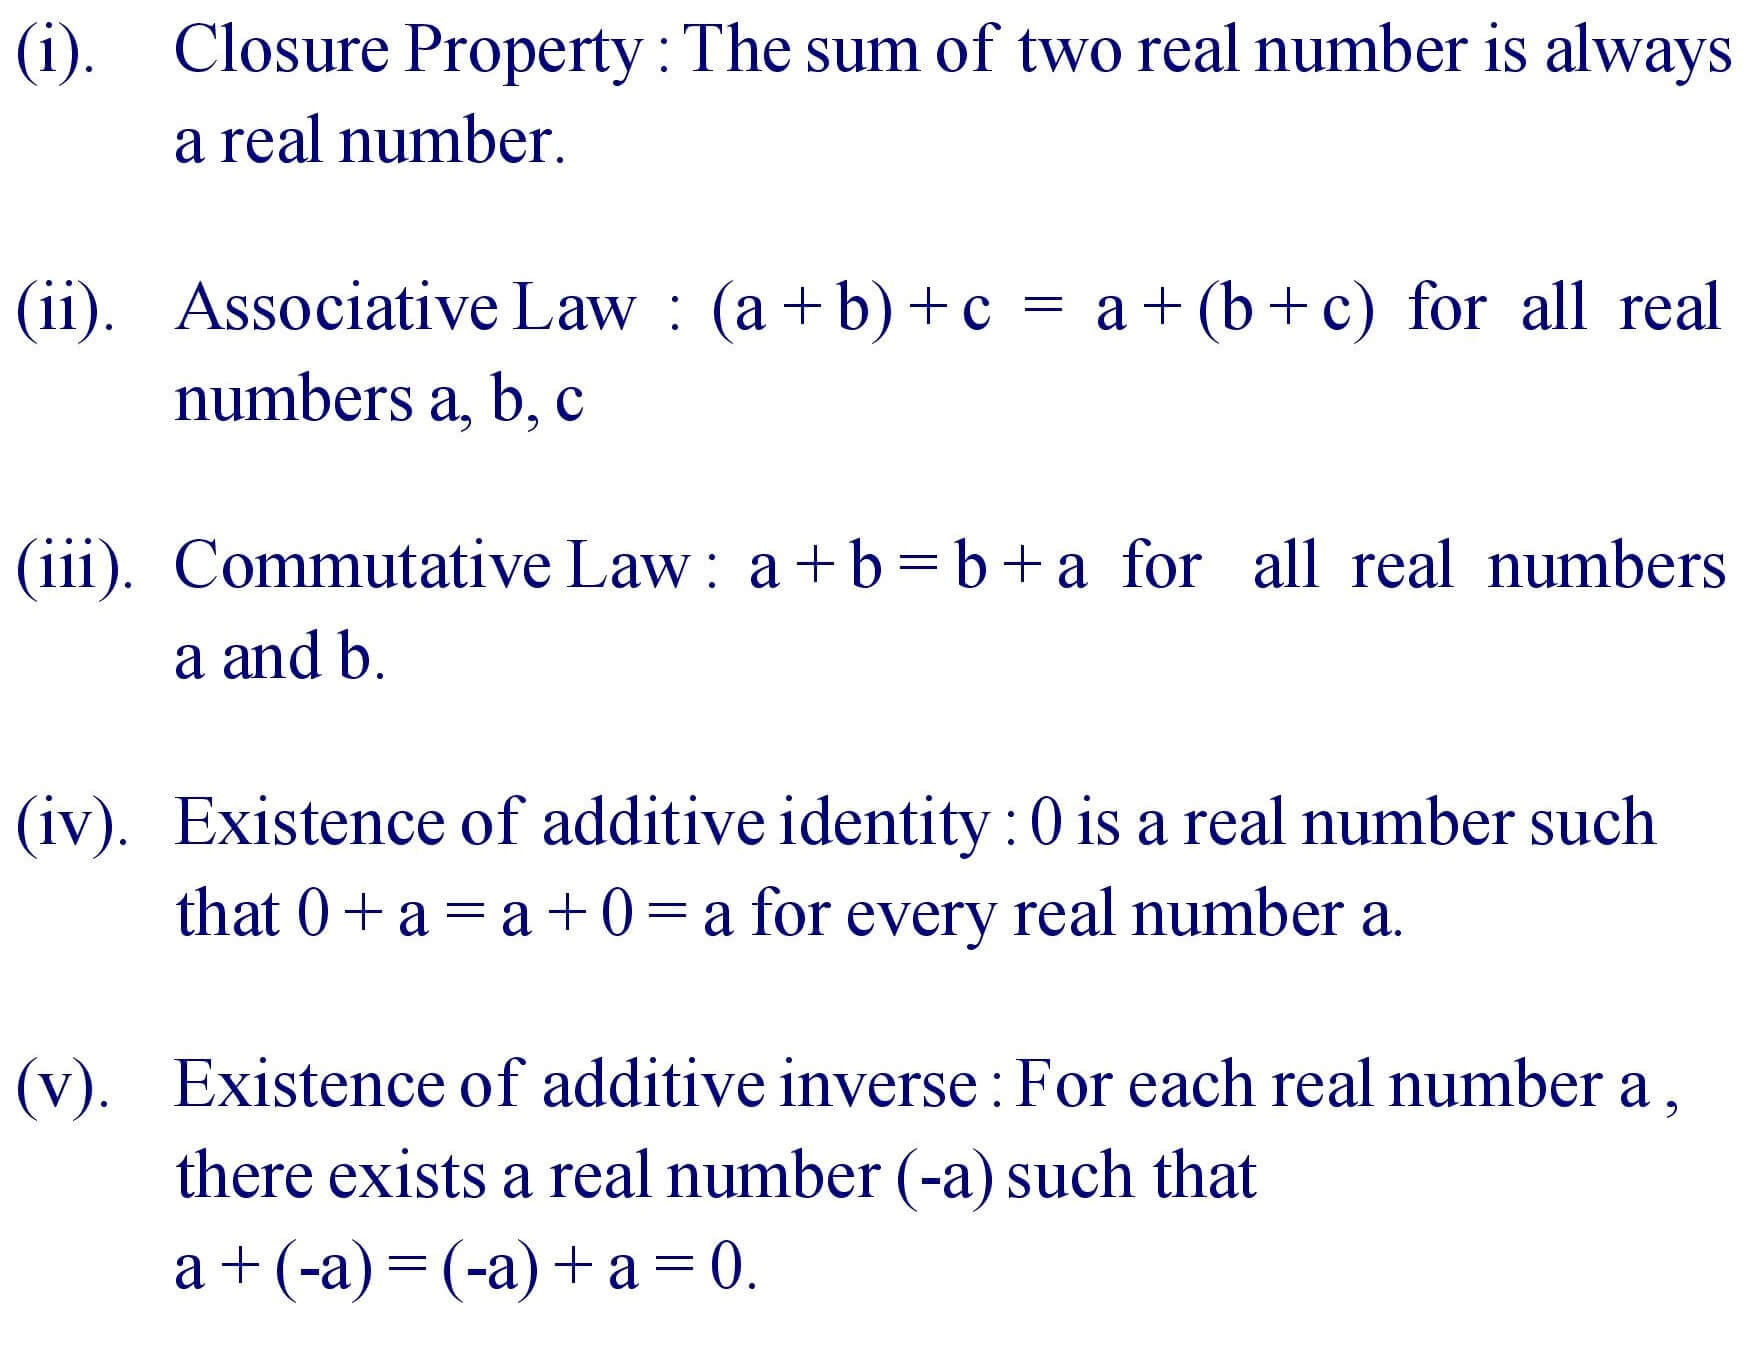 Addition properties of Real Numbers